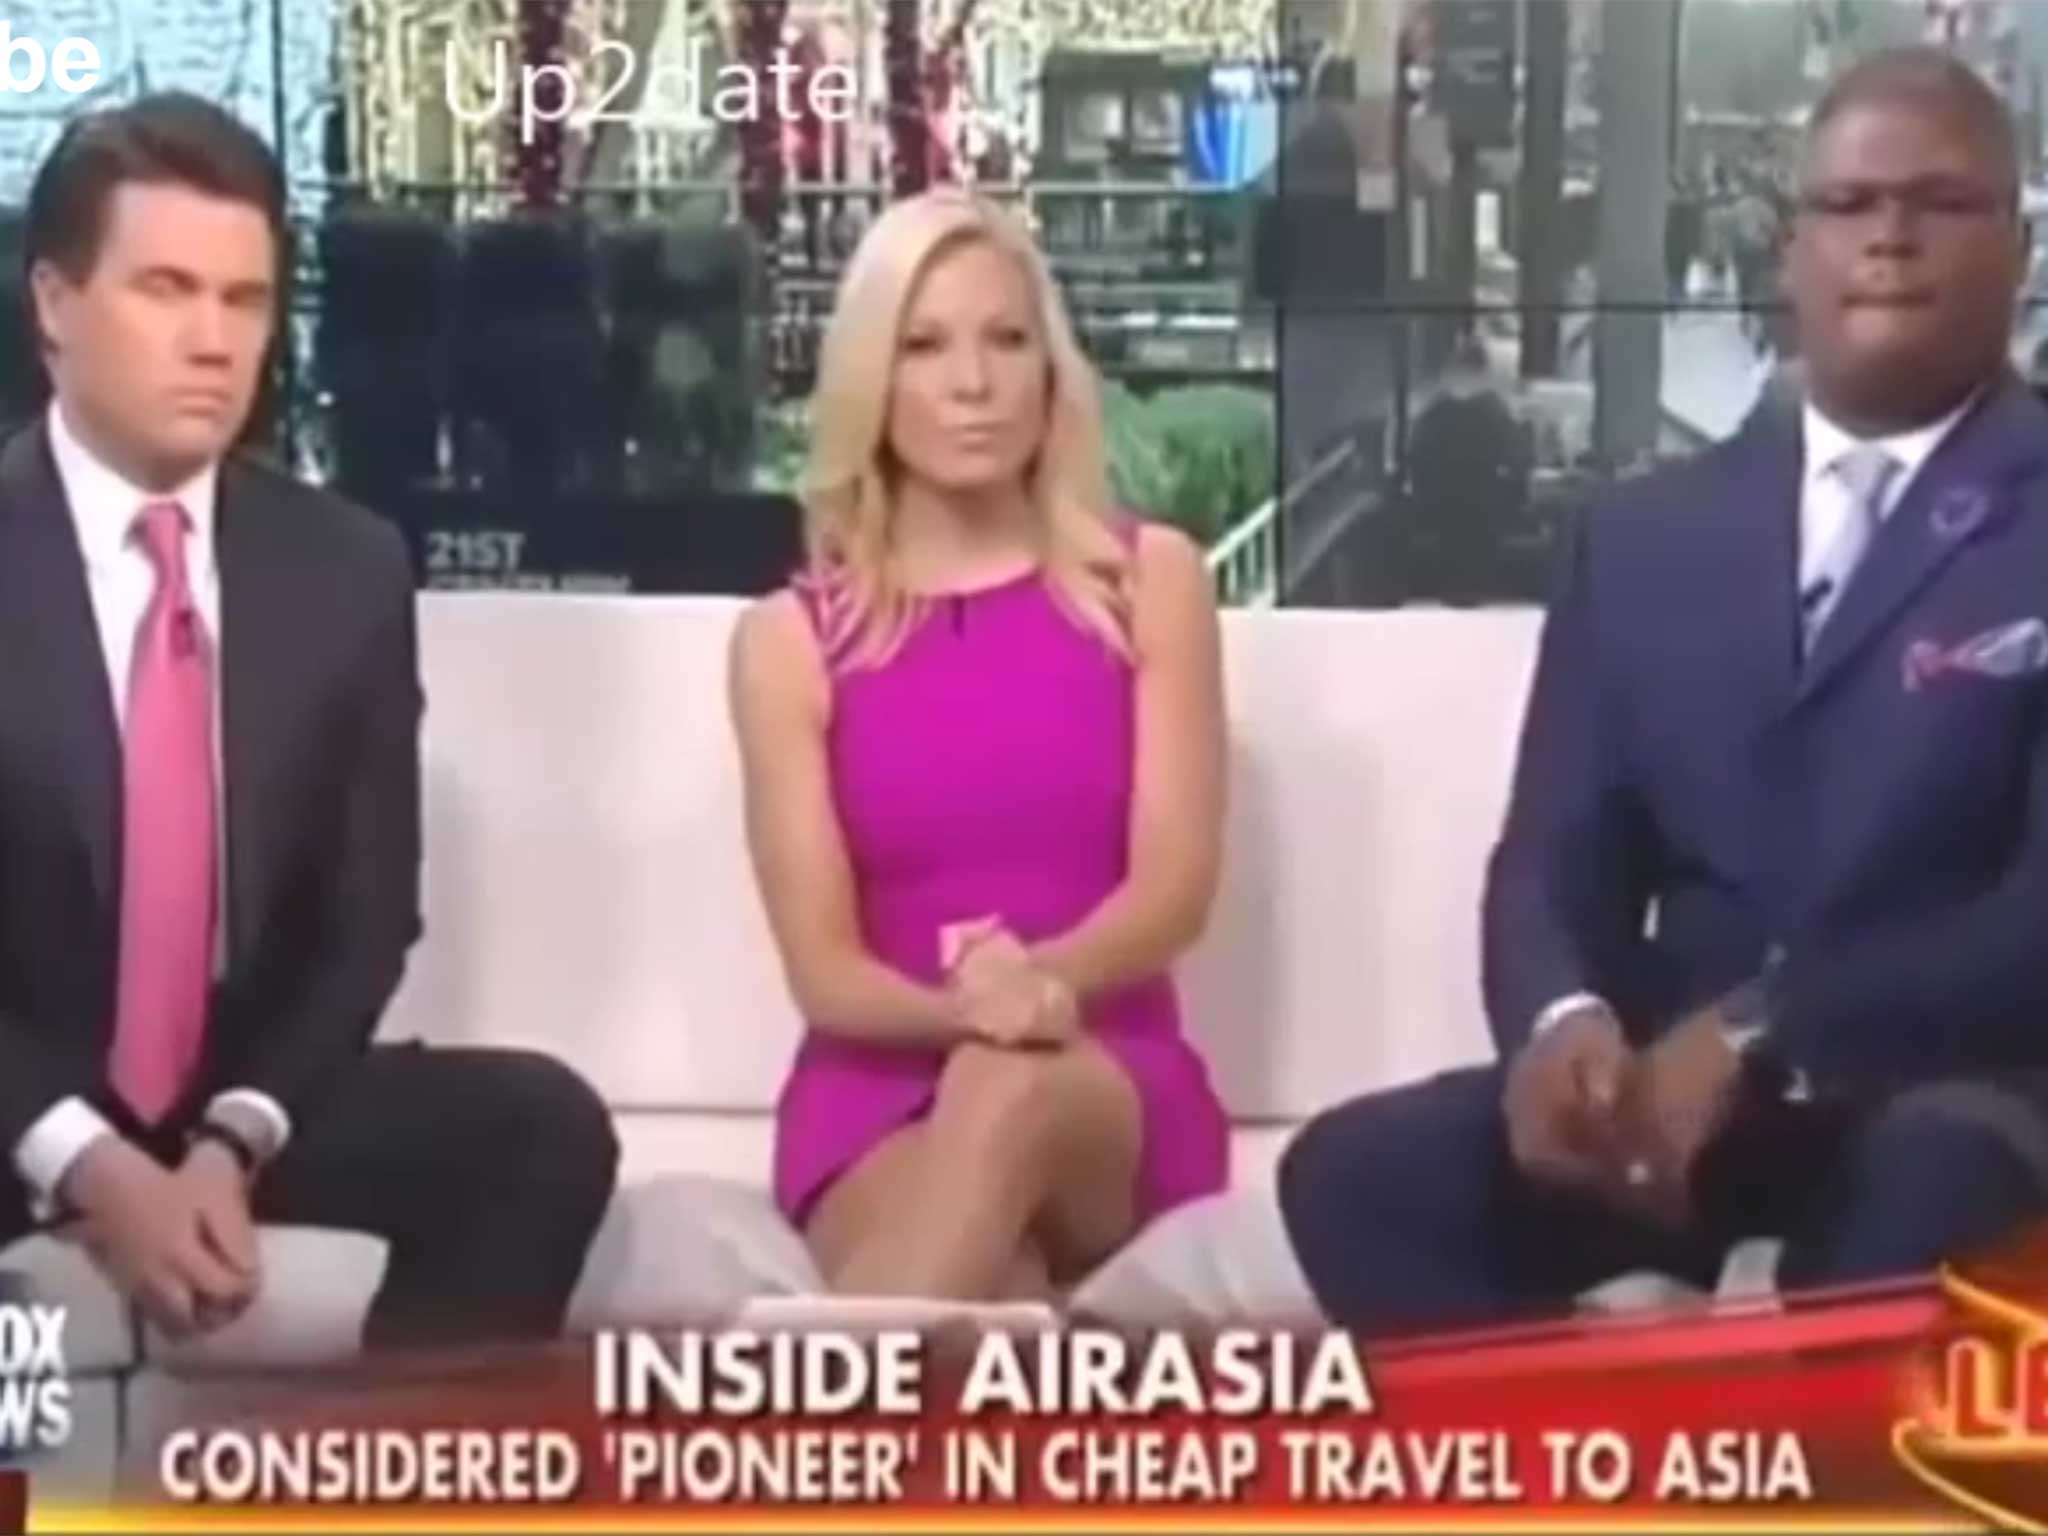 Fox News presenter mocked after appearing to link disappearance of